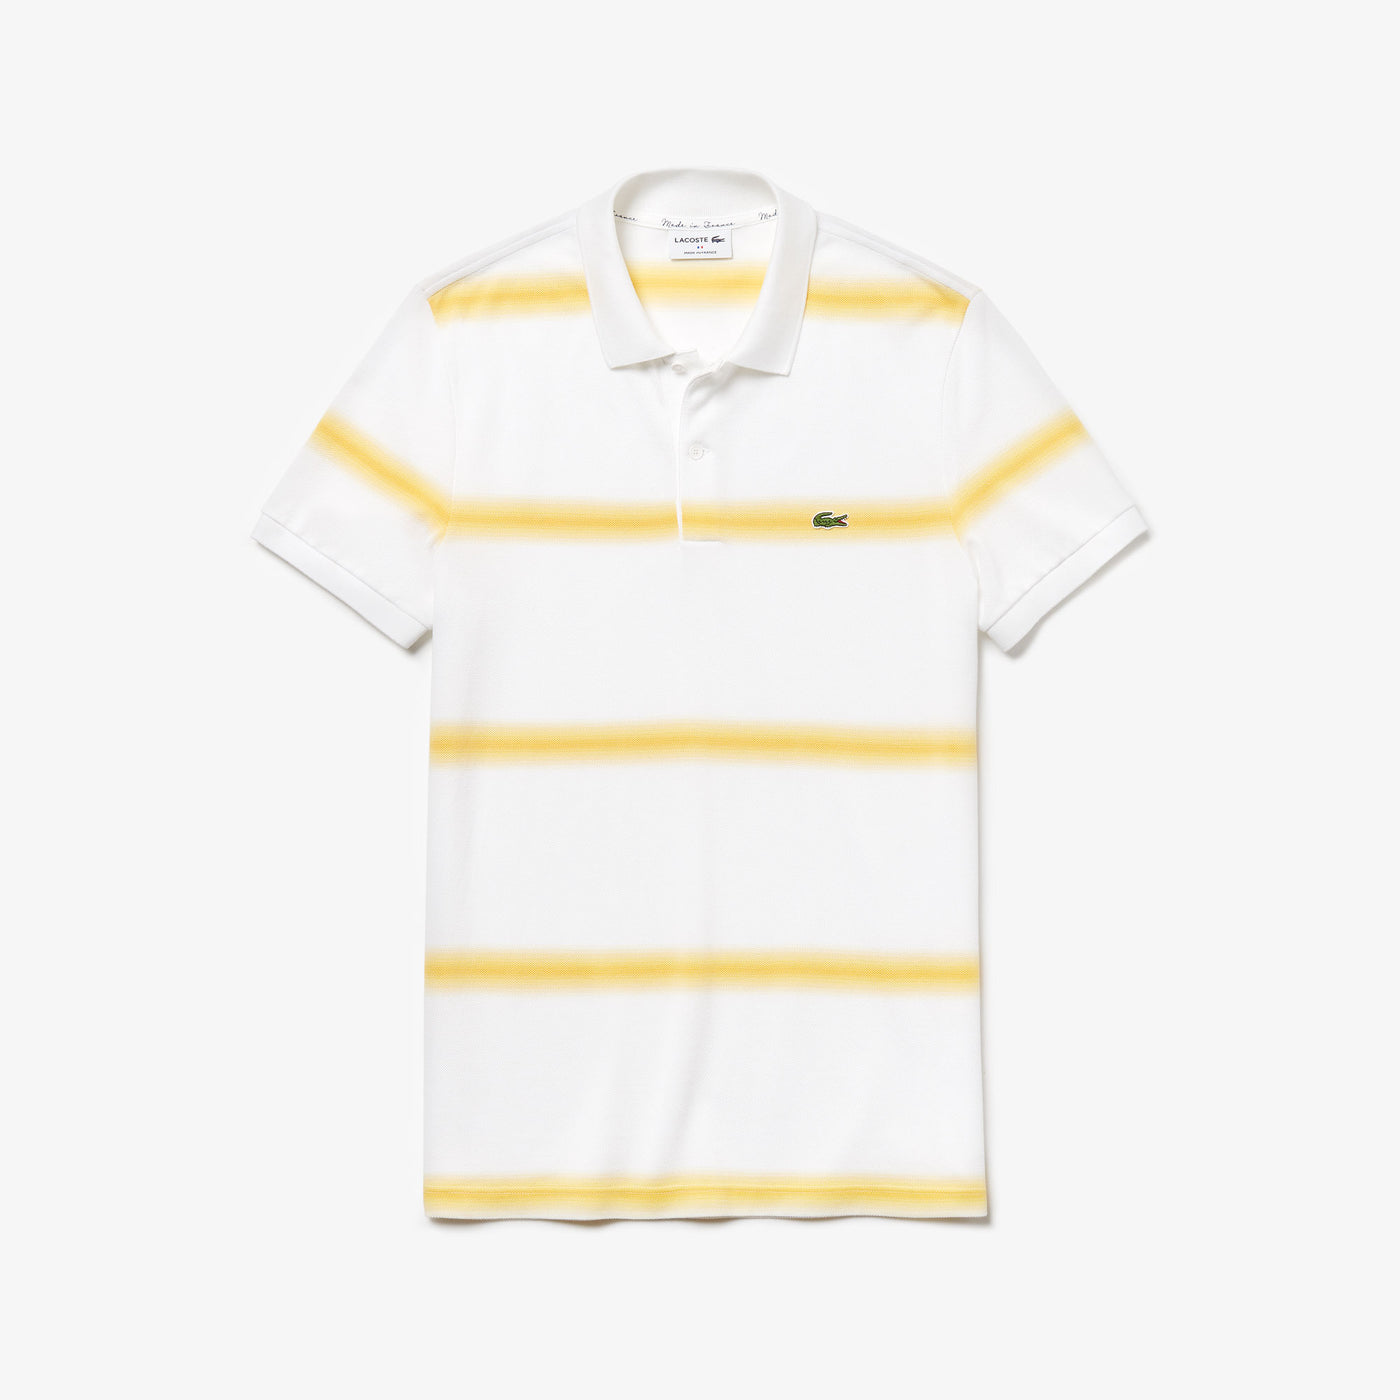 Shop The Latest Collection Of Outlet - Lacoste Mens Lacoste Made In France Regular Fit Cotton Pique Polo Shirt - Ph5071 In Lebanon